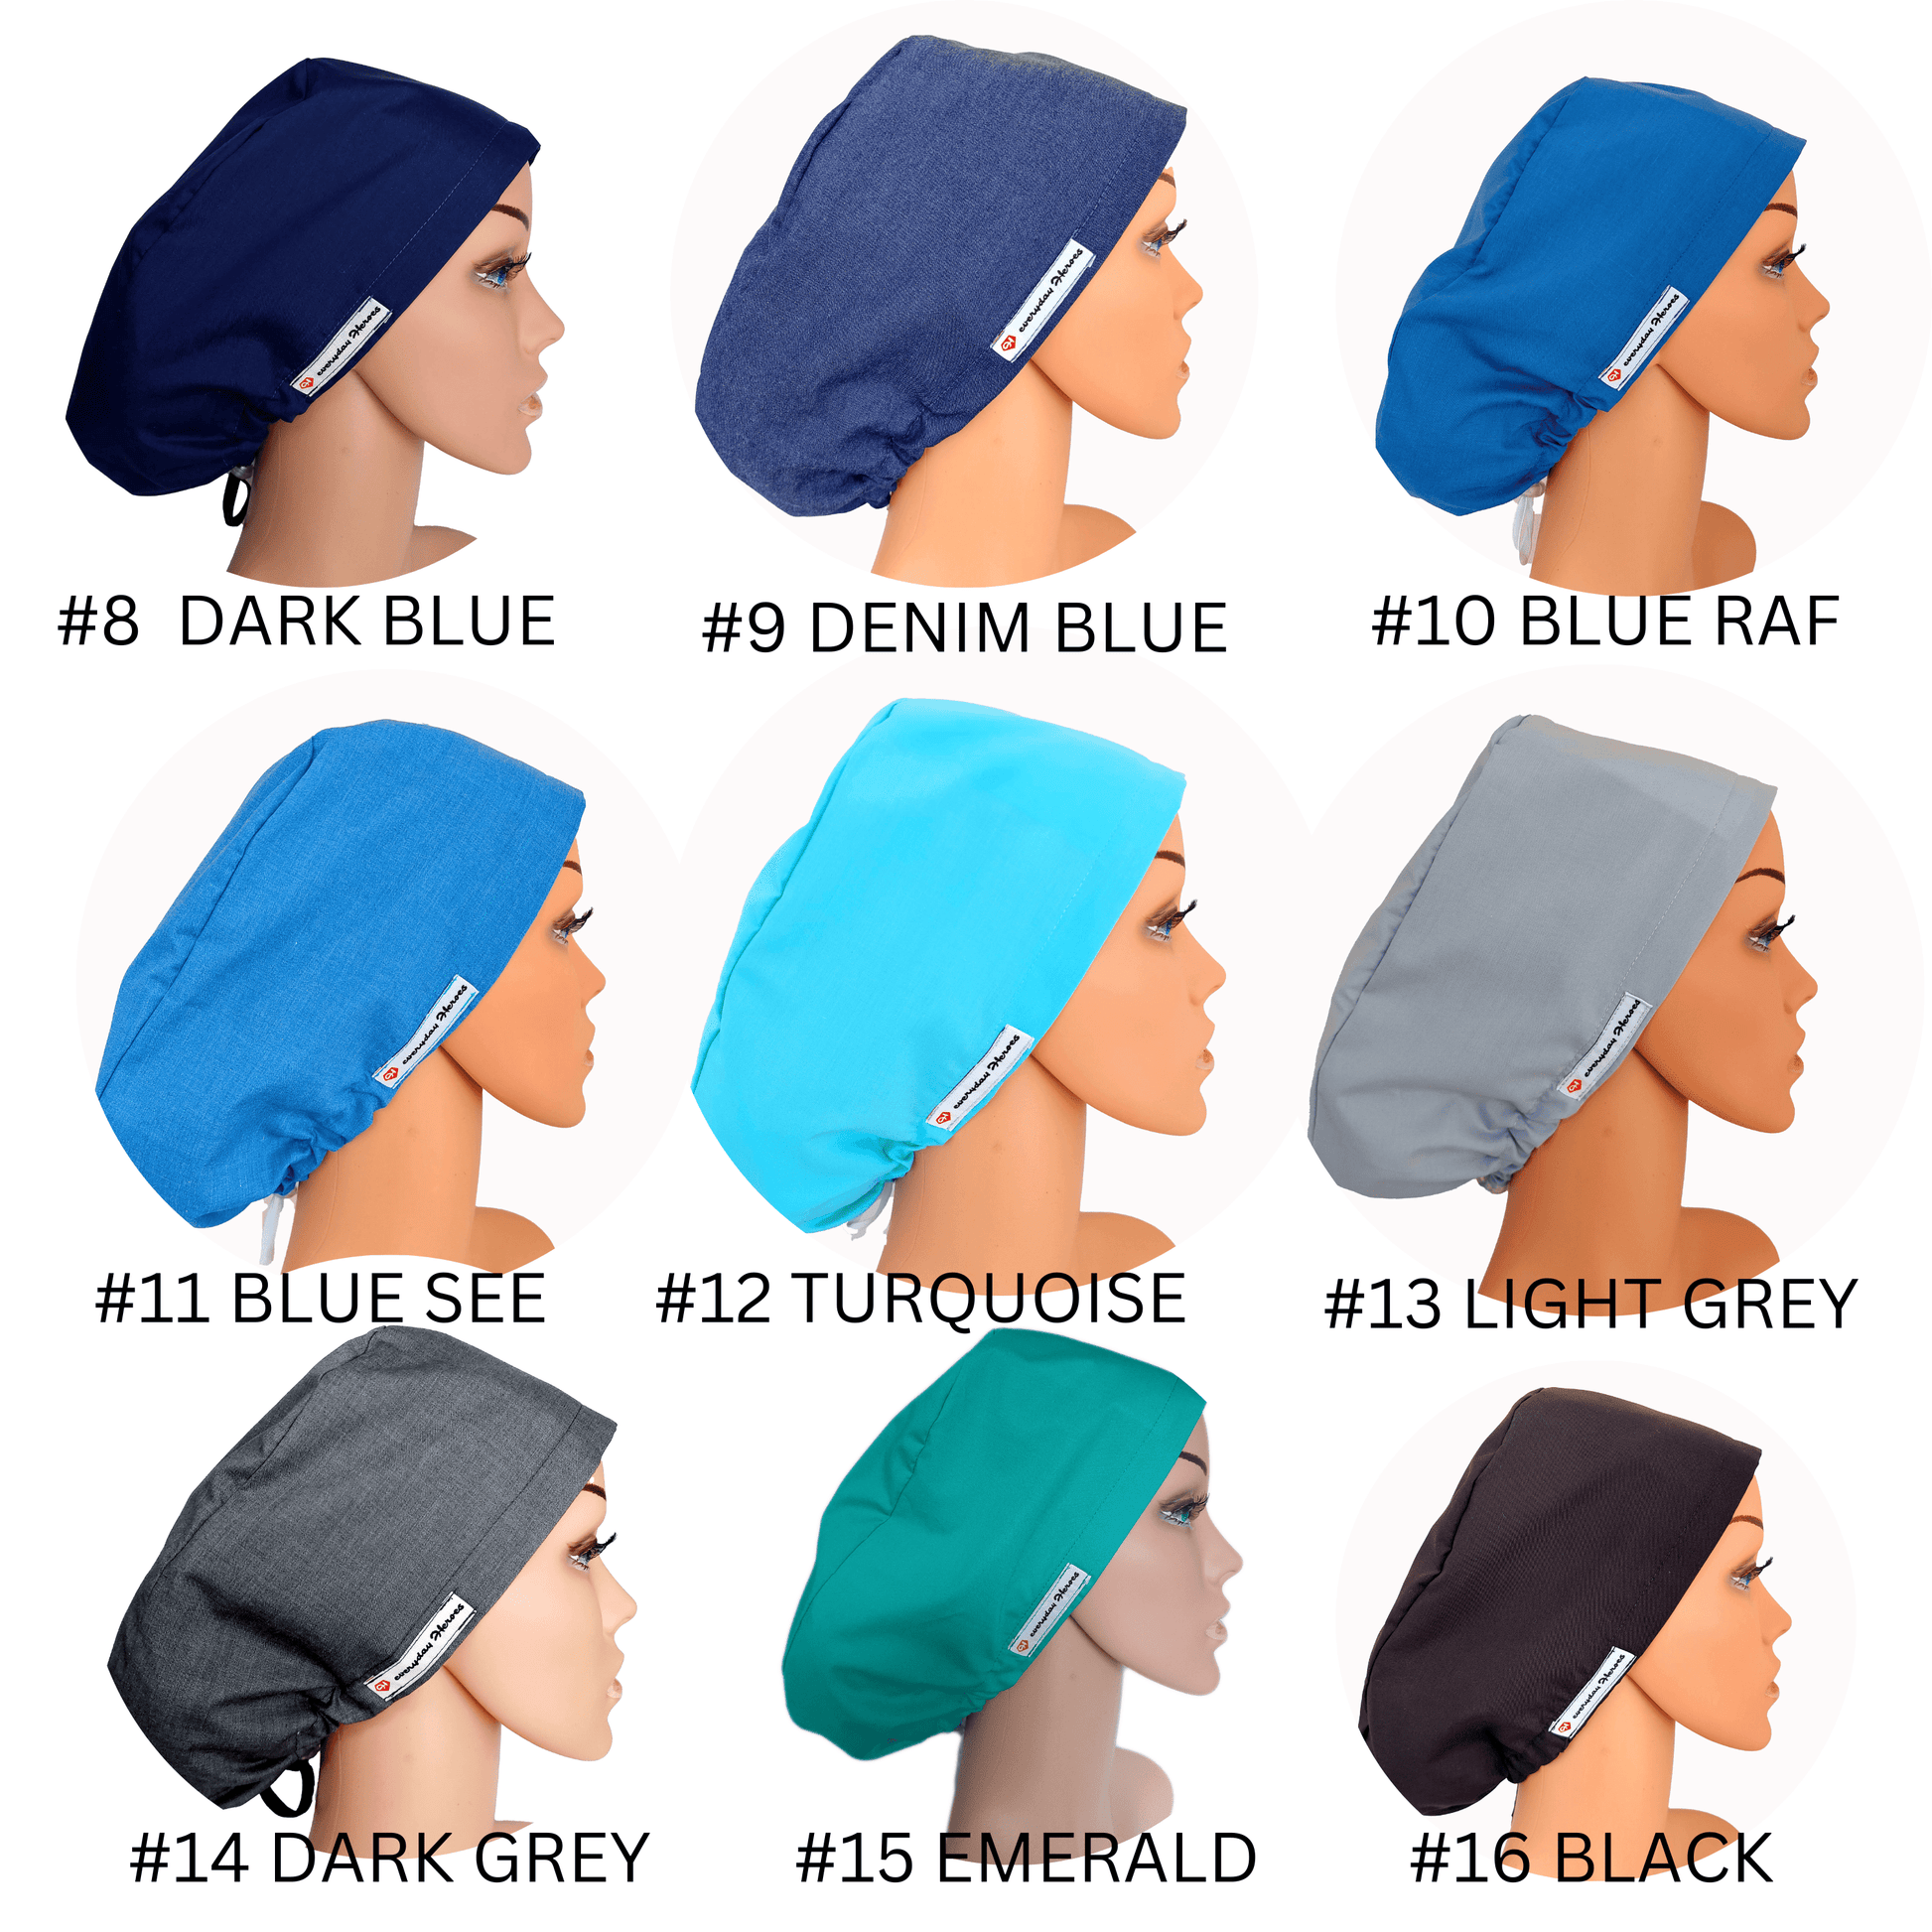 Custom Scrub Caps for Nurses-Solid Colors with Name Personalization-Satin Inside